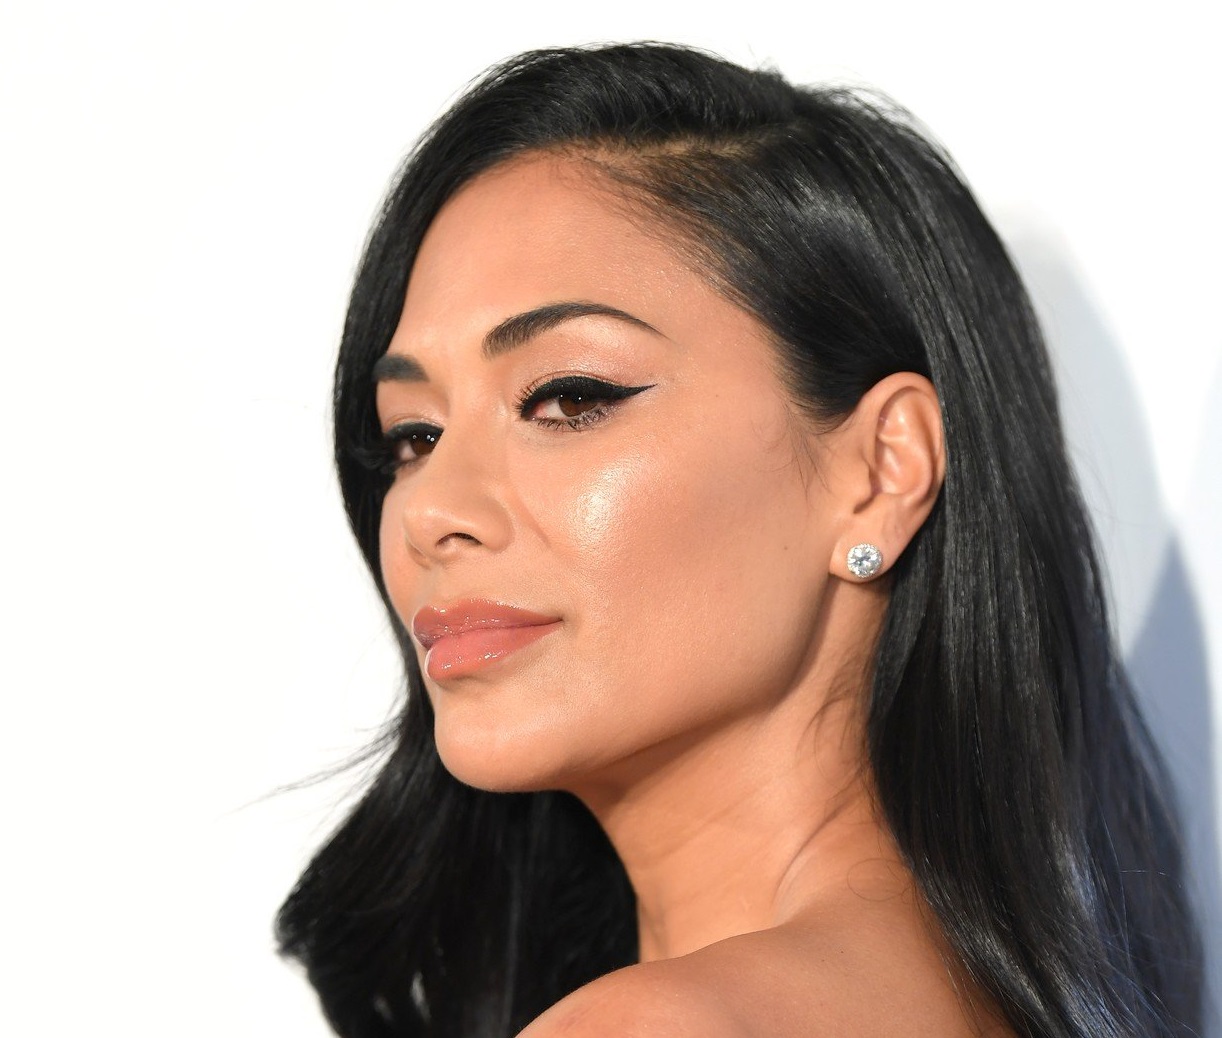 Nicole Scherzinger attending the Elton John AIDS Foundation Viewing Party held at West Hollywood Park, Los Angeles, California, USA., Image: 415743157, License: Rights-managed, Restrictions: , Model Release: no, Credit line: Profimedia, Press Association